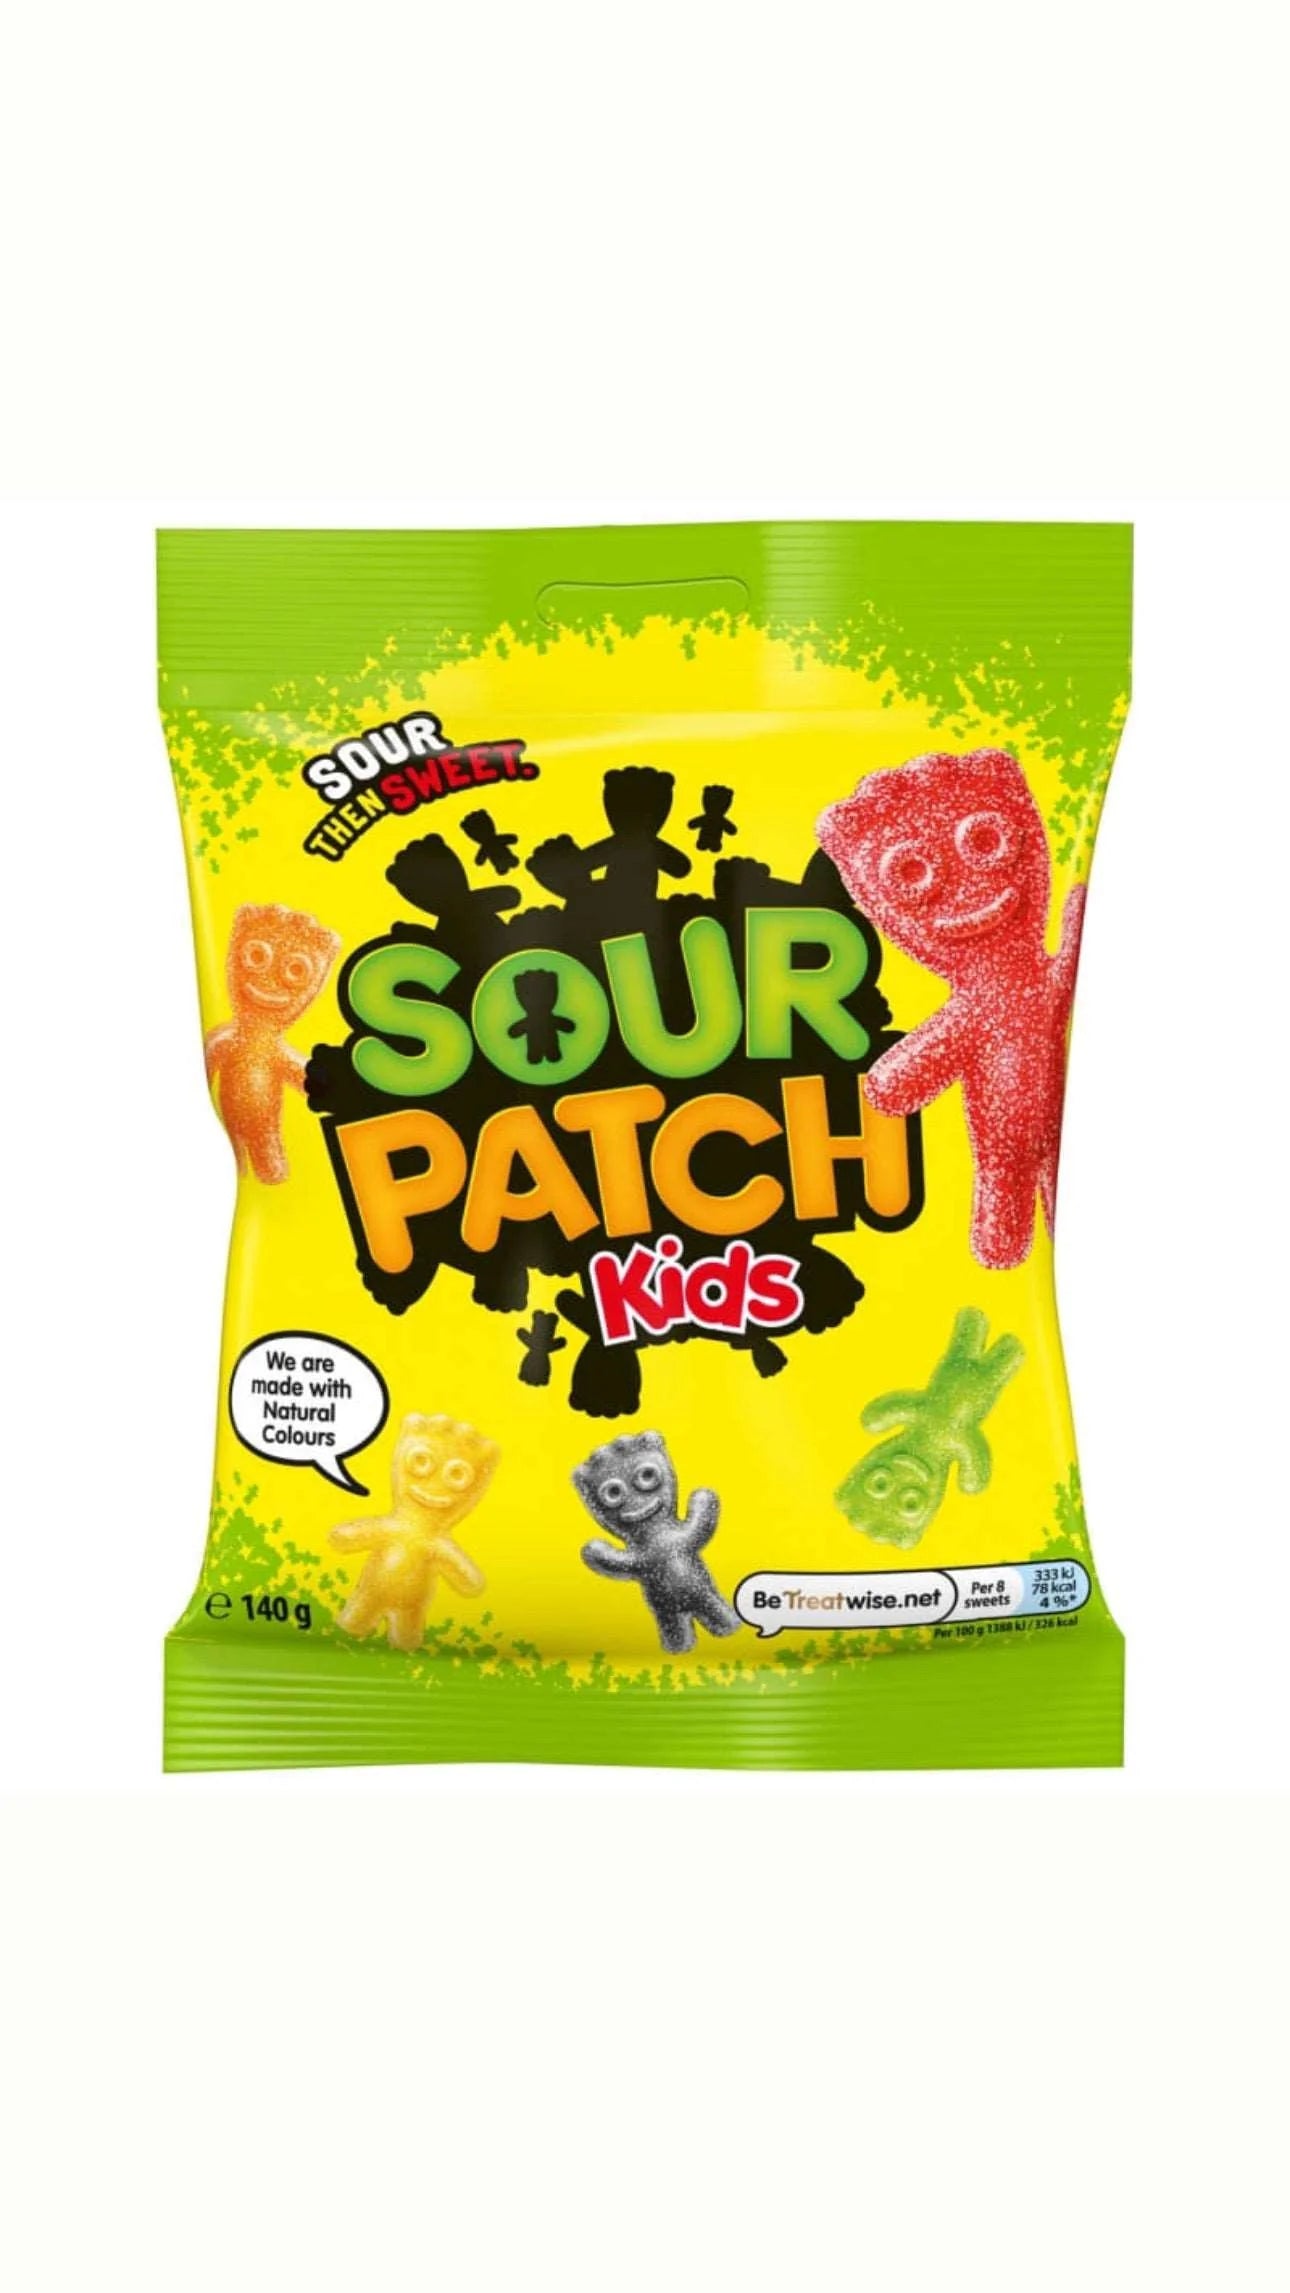 Sour Patch Kids USA - Caramelle gommose aspre gusto mix di frutta (130g) candy online